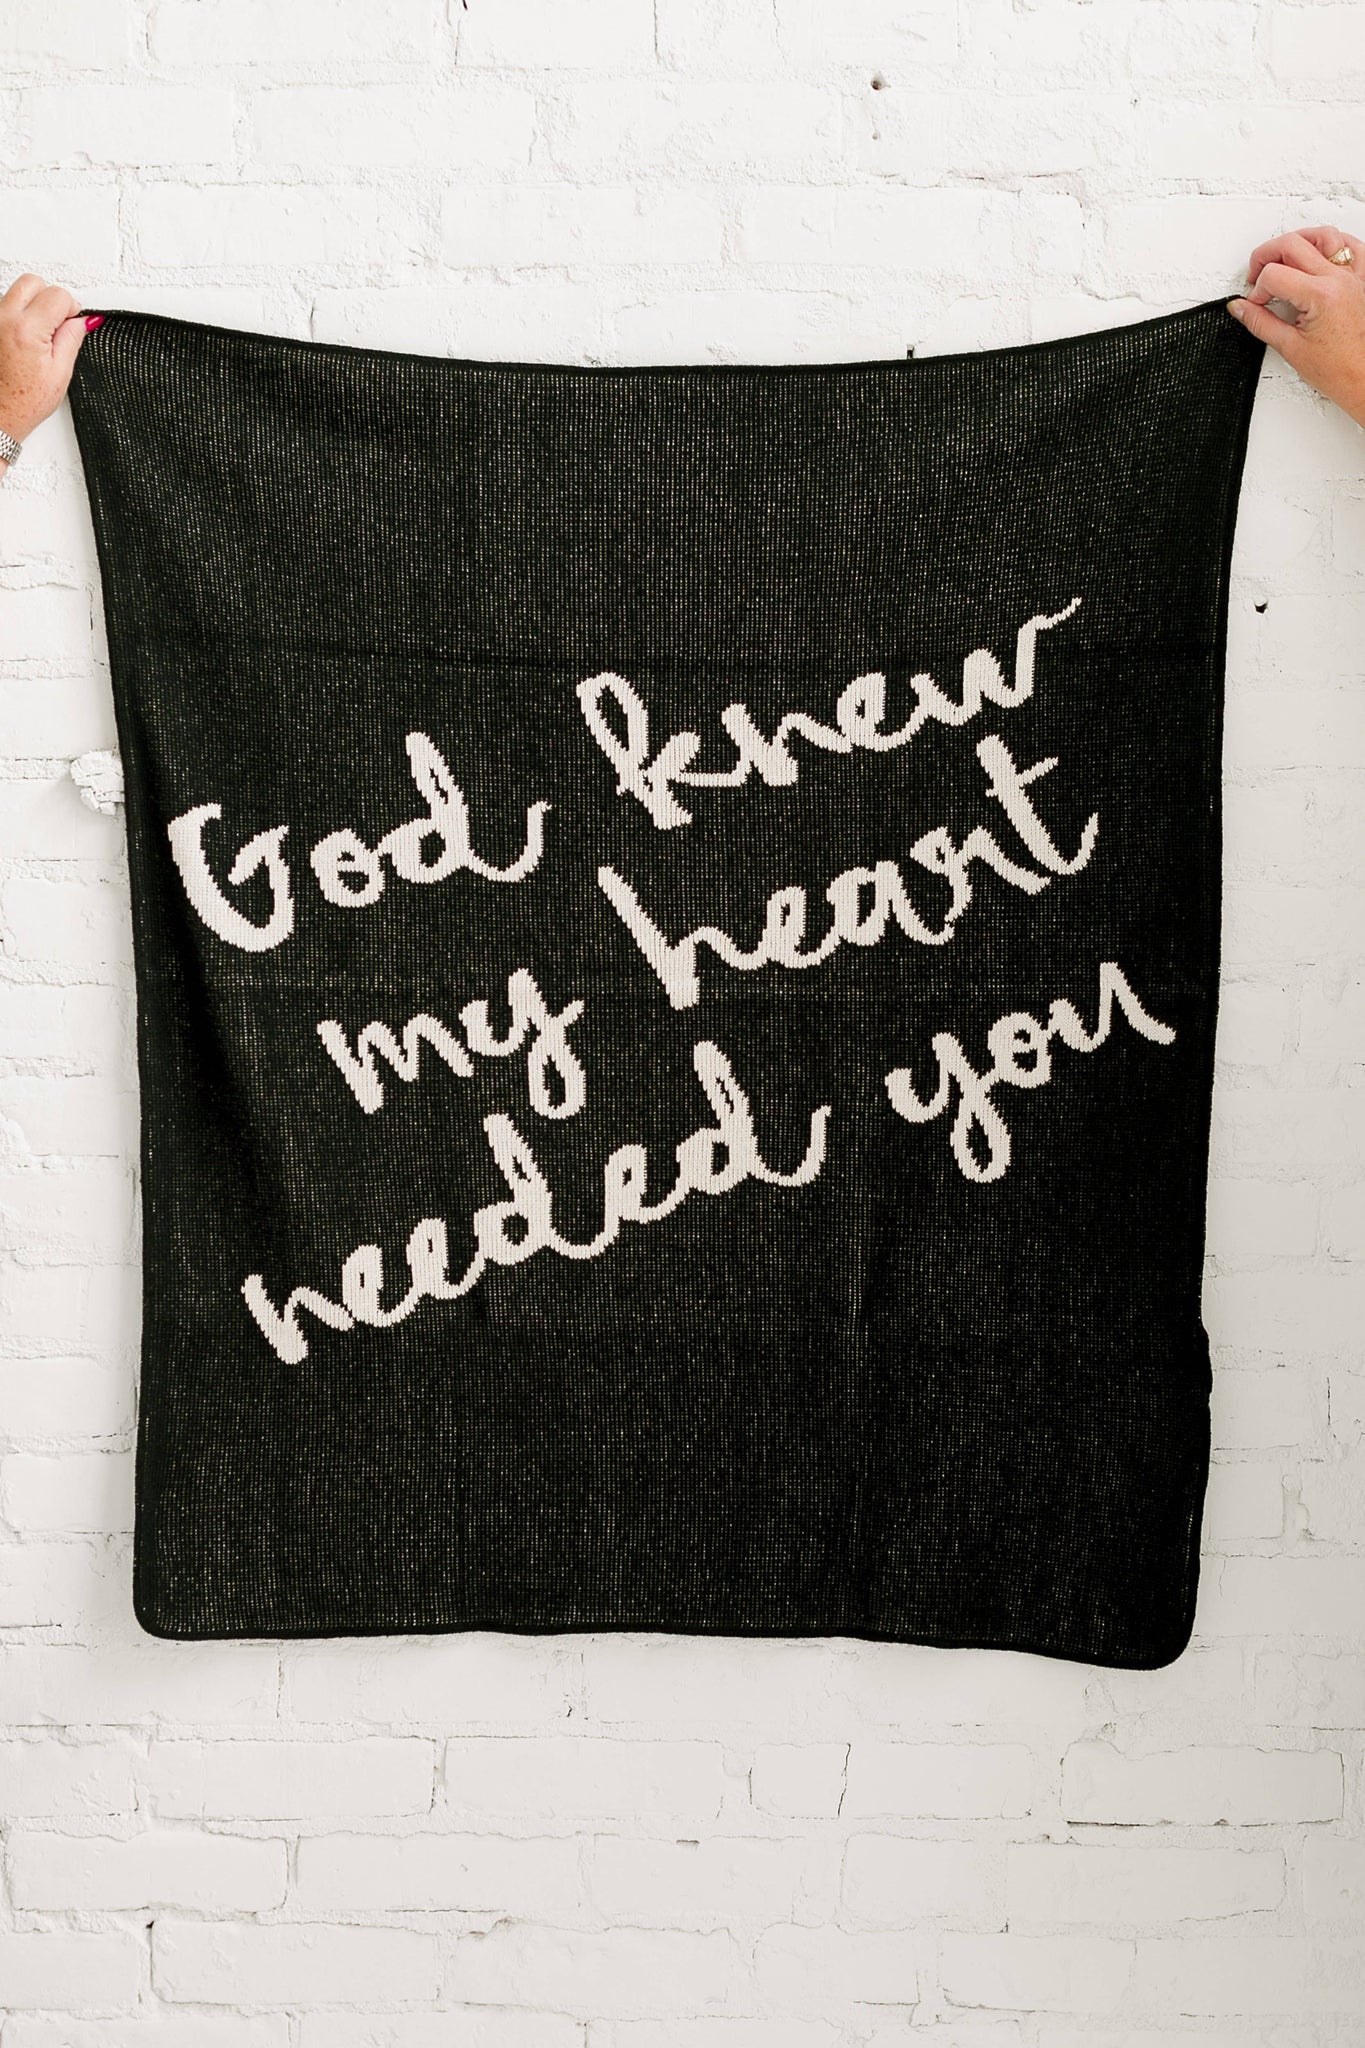 Brand of Bliss Made in the USA | God Knew My Heart Needed You |  Black